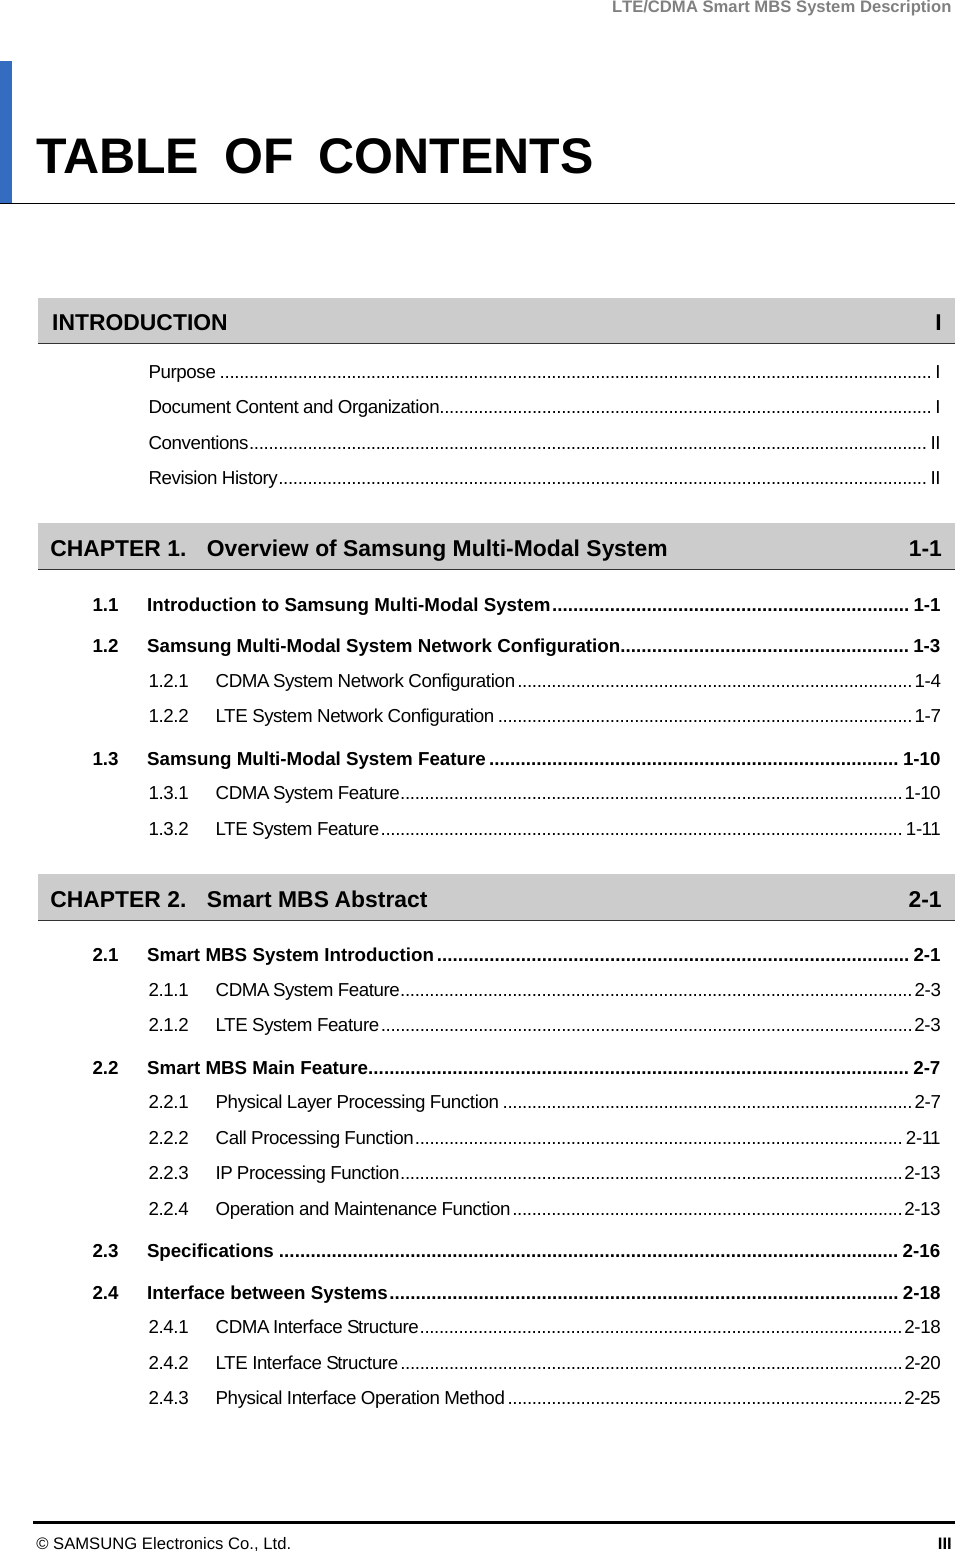 LTE/CDMA Smart MBS System Description © SAMSUNG Electronics Co., Ltd.  III TABLE OF CONTENTS   INTRODUCTION I Purpose .................................................................................................................................................. I Document Content and Organization..................................................................................................... I Conventions........................................................................................................................................... II Revision History..................................................................................................................................... II CHAPTER 1. Overview of Samsung Multi-Modal System  1-1 1.1 Introduction to Samsung Multi-Modal System.................................................................... 1-1 1.2 Samsung Multi-Modal System Network Configuration....................................................... 1-3 1.2.1 CDMA System Network Configuration.................................................................................1-4 1.2.2 LTE System Network Configuration .....................................................................................1-7 1.3 Samsung Multi-Modal System Feature.............................................................................. 1-10 1.3.1 CDMA System Feature.......................................................................................................1-10 1.3.2 LTE System Feature........................................................................................................... 1-11 CHAPTER 2. Smart MBS Abstract  2-1 2.1 Smart MBS System Introduction.......................................................................................... 2-1 2.1.1 CDMA System Feature.........................................................................................................2-3 2.1.2 LTE System Feature.............................................................................................................2-3 2.2 Smart MBS Main Feature....................................................................................................... 2-7 2.2.1 Physical Layer Processing Function ....................................................................................2-7 2.2.2 Call Processing Function.................................................................................................... 2-11 2.2.3 IP Processing Function.......................................................................................................2-13 2.2.4 Operation and Maintenance Function................................................................................2-13 2.3 Specifications ...................................................................................................................... 2-16 2.4 Interface between Systems................................................................................................. 2-18 2.4.1 CDMA Interface Structure...................................................................................................2-18 2.4.2 LTE Interface Structure.......................................................................................................2-20 2.4.3 Physical Interface Operation Method .................................................................................2-25 